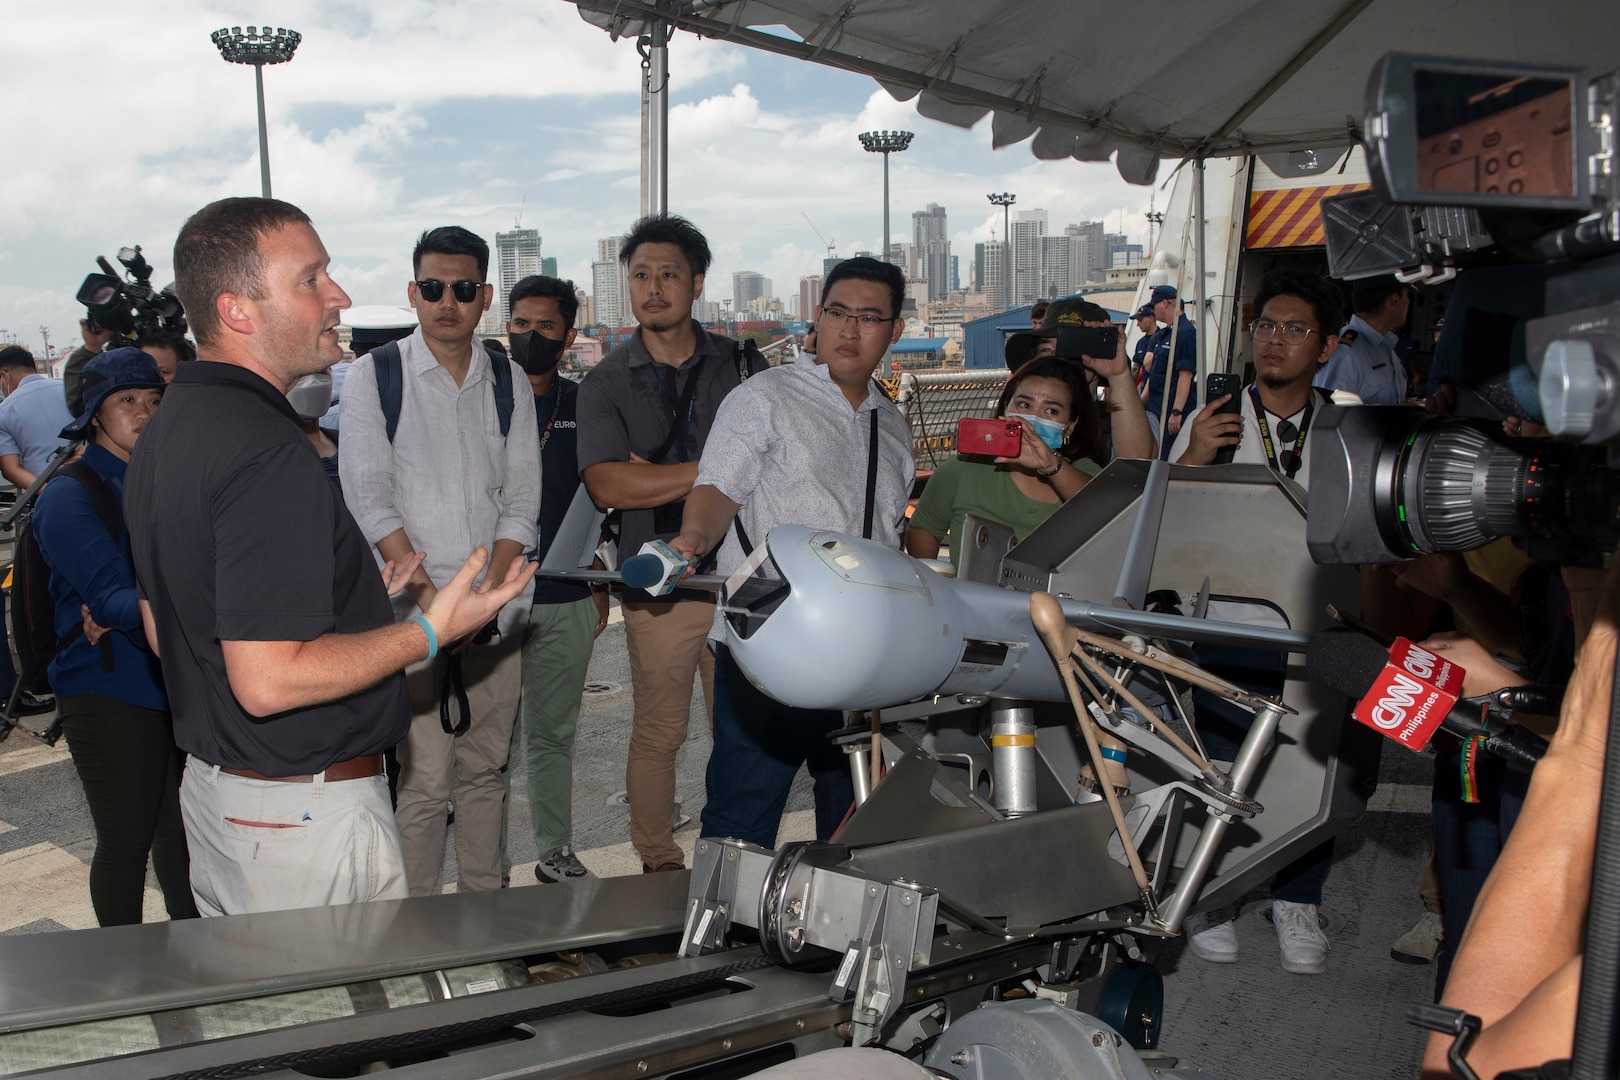 Unmanned Aerial System Operator Troy Spence explains the ScanEagle UAS during a media tour on the flight deck of U.S. Coast Guard Cutter Stratton (WMSL 752) after the ship moored in the Port of Manila, Philippines, June 1. Stratton deployed to the Western Pacific under U.S. Navy 7th Fleet command as a non-escalatory asset for the promotion of a rules-based order in the maritime domain by engaging with partner nations and allies in the region. (U.S. Navy photo by Chief Petty Officer Brett Cote)